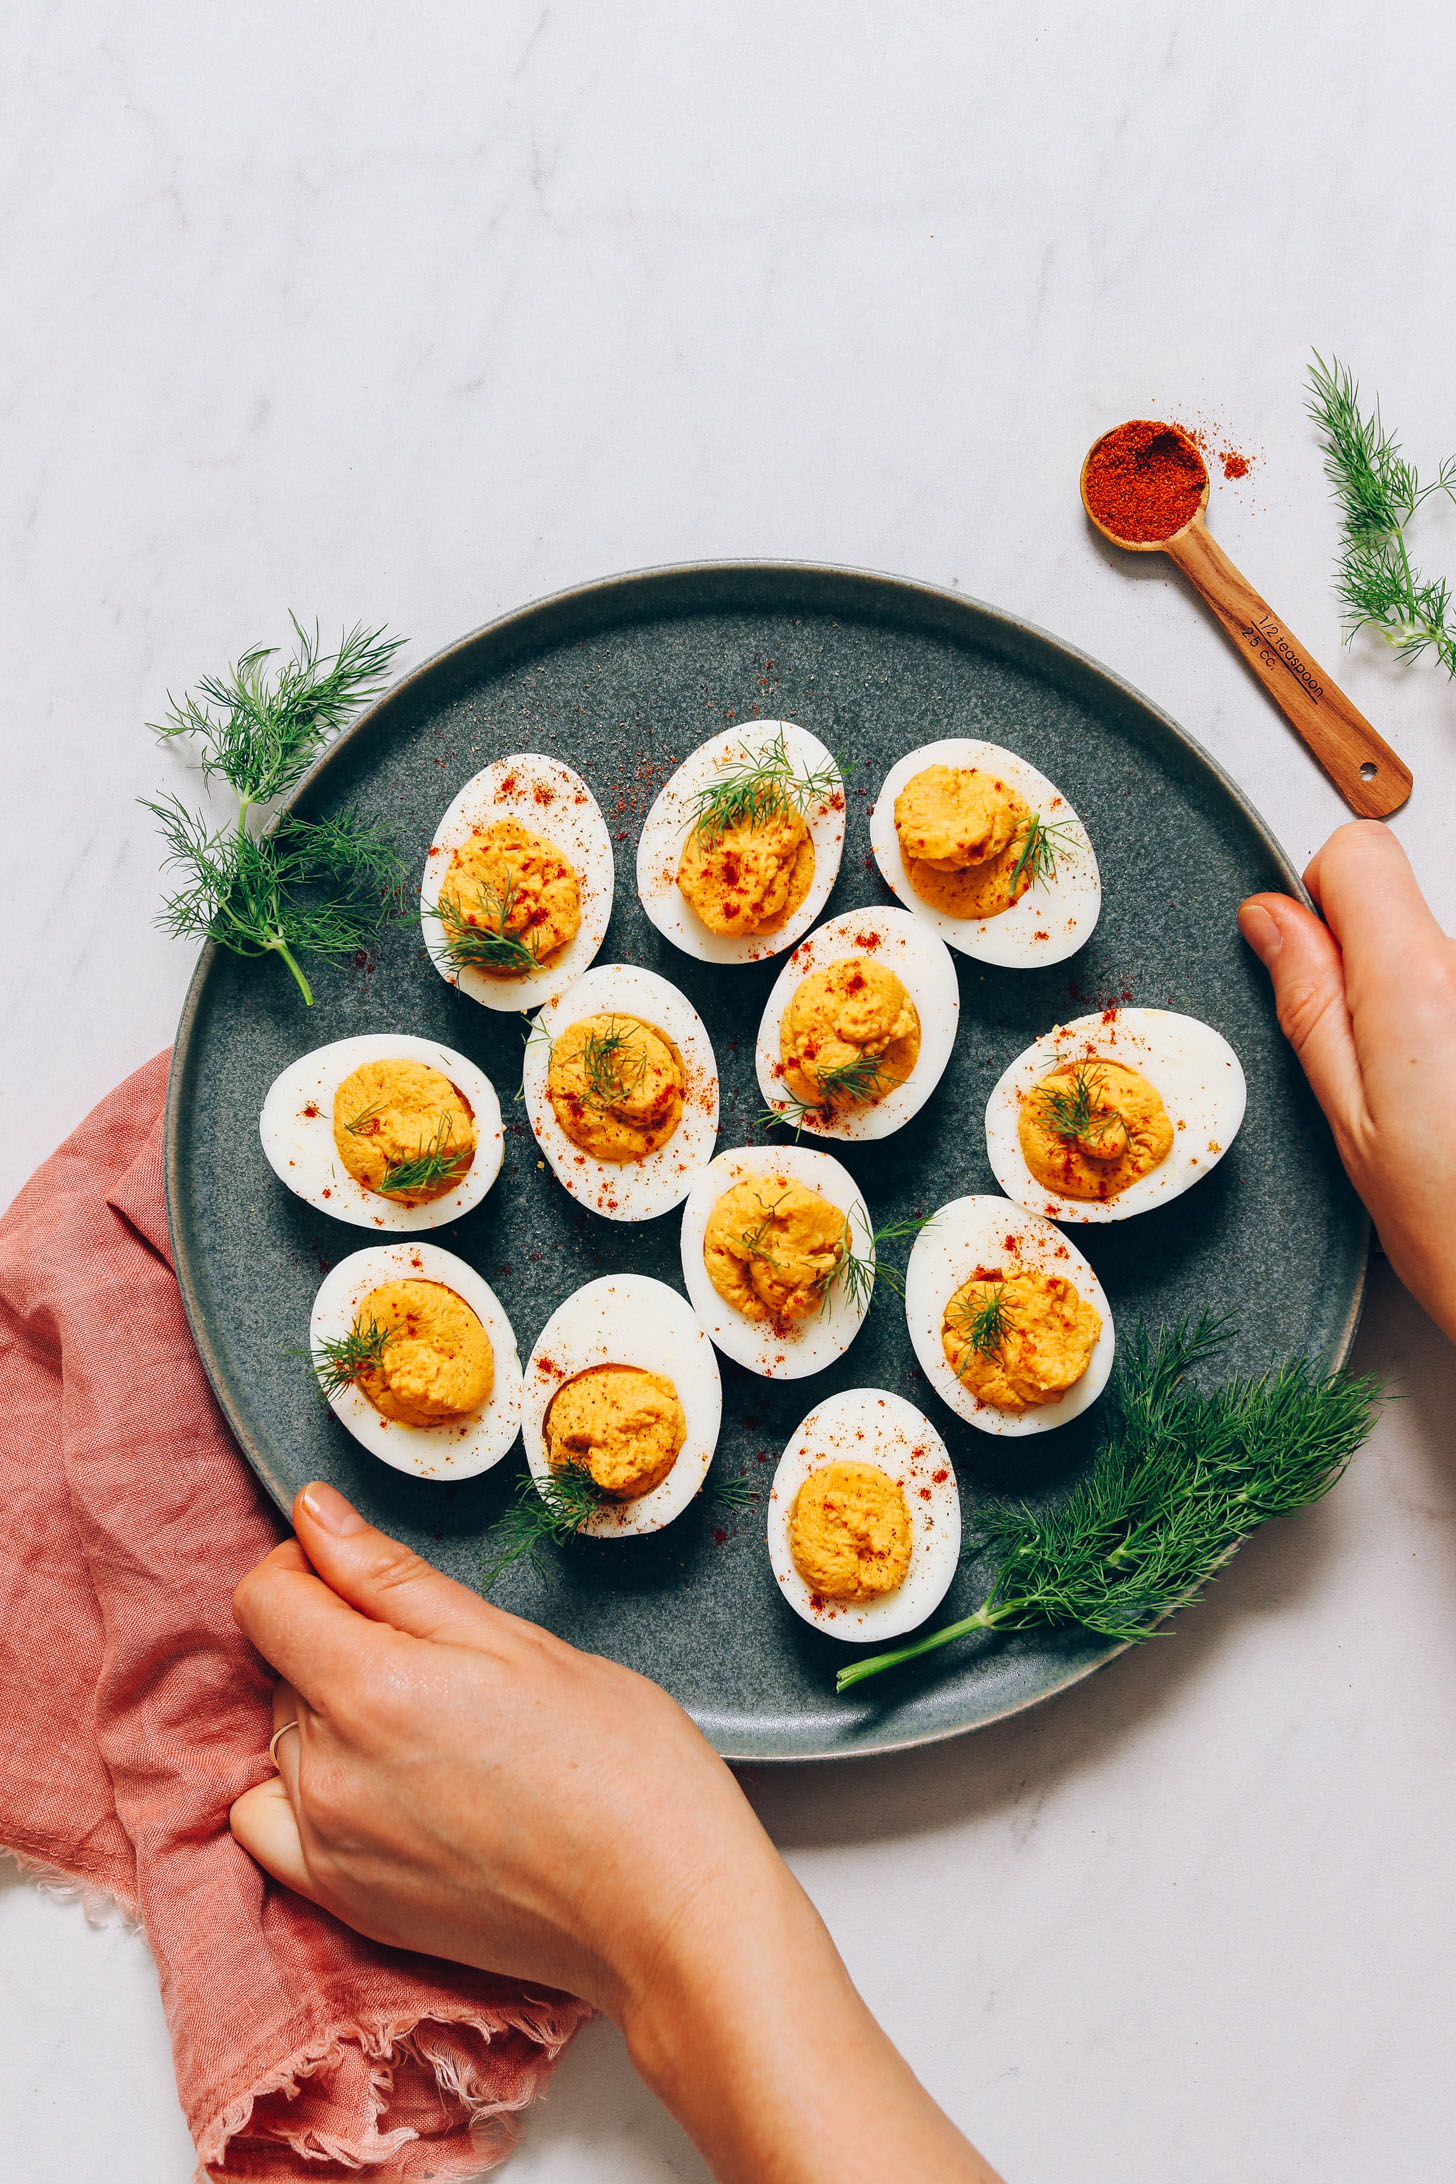 Holding the sides of a plate of Mayo-Free Deviled Eggs